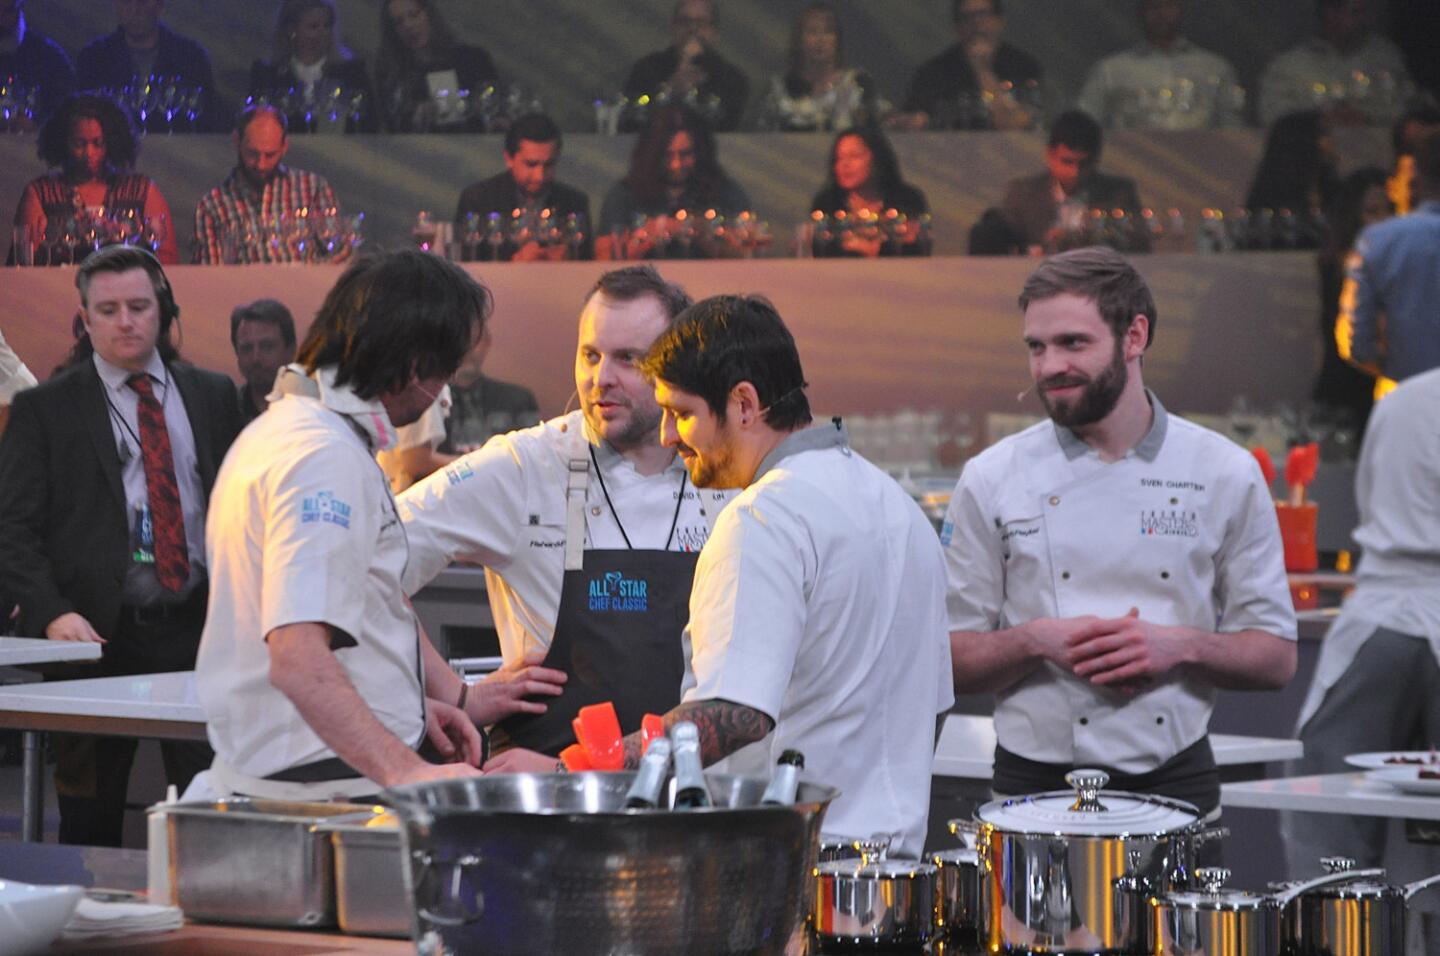 From left, Inaki Aizpitarte, David Toutain, Ludo Lefebvre and Sven Chartier in the kitchen at the French Masters Dinner at the All Star Chef Classic at L.A. Live.